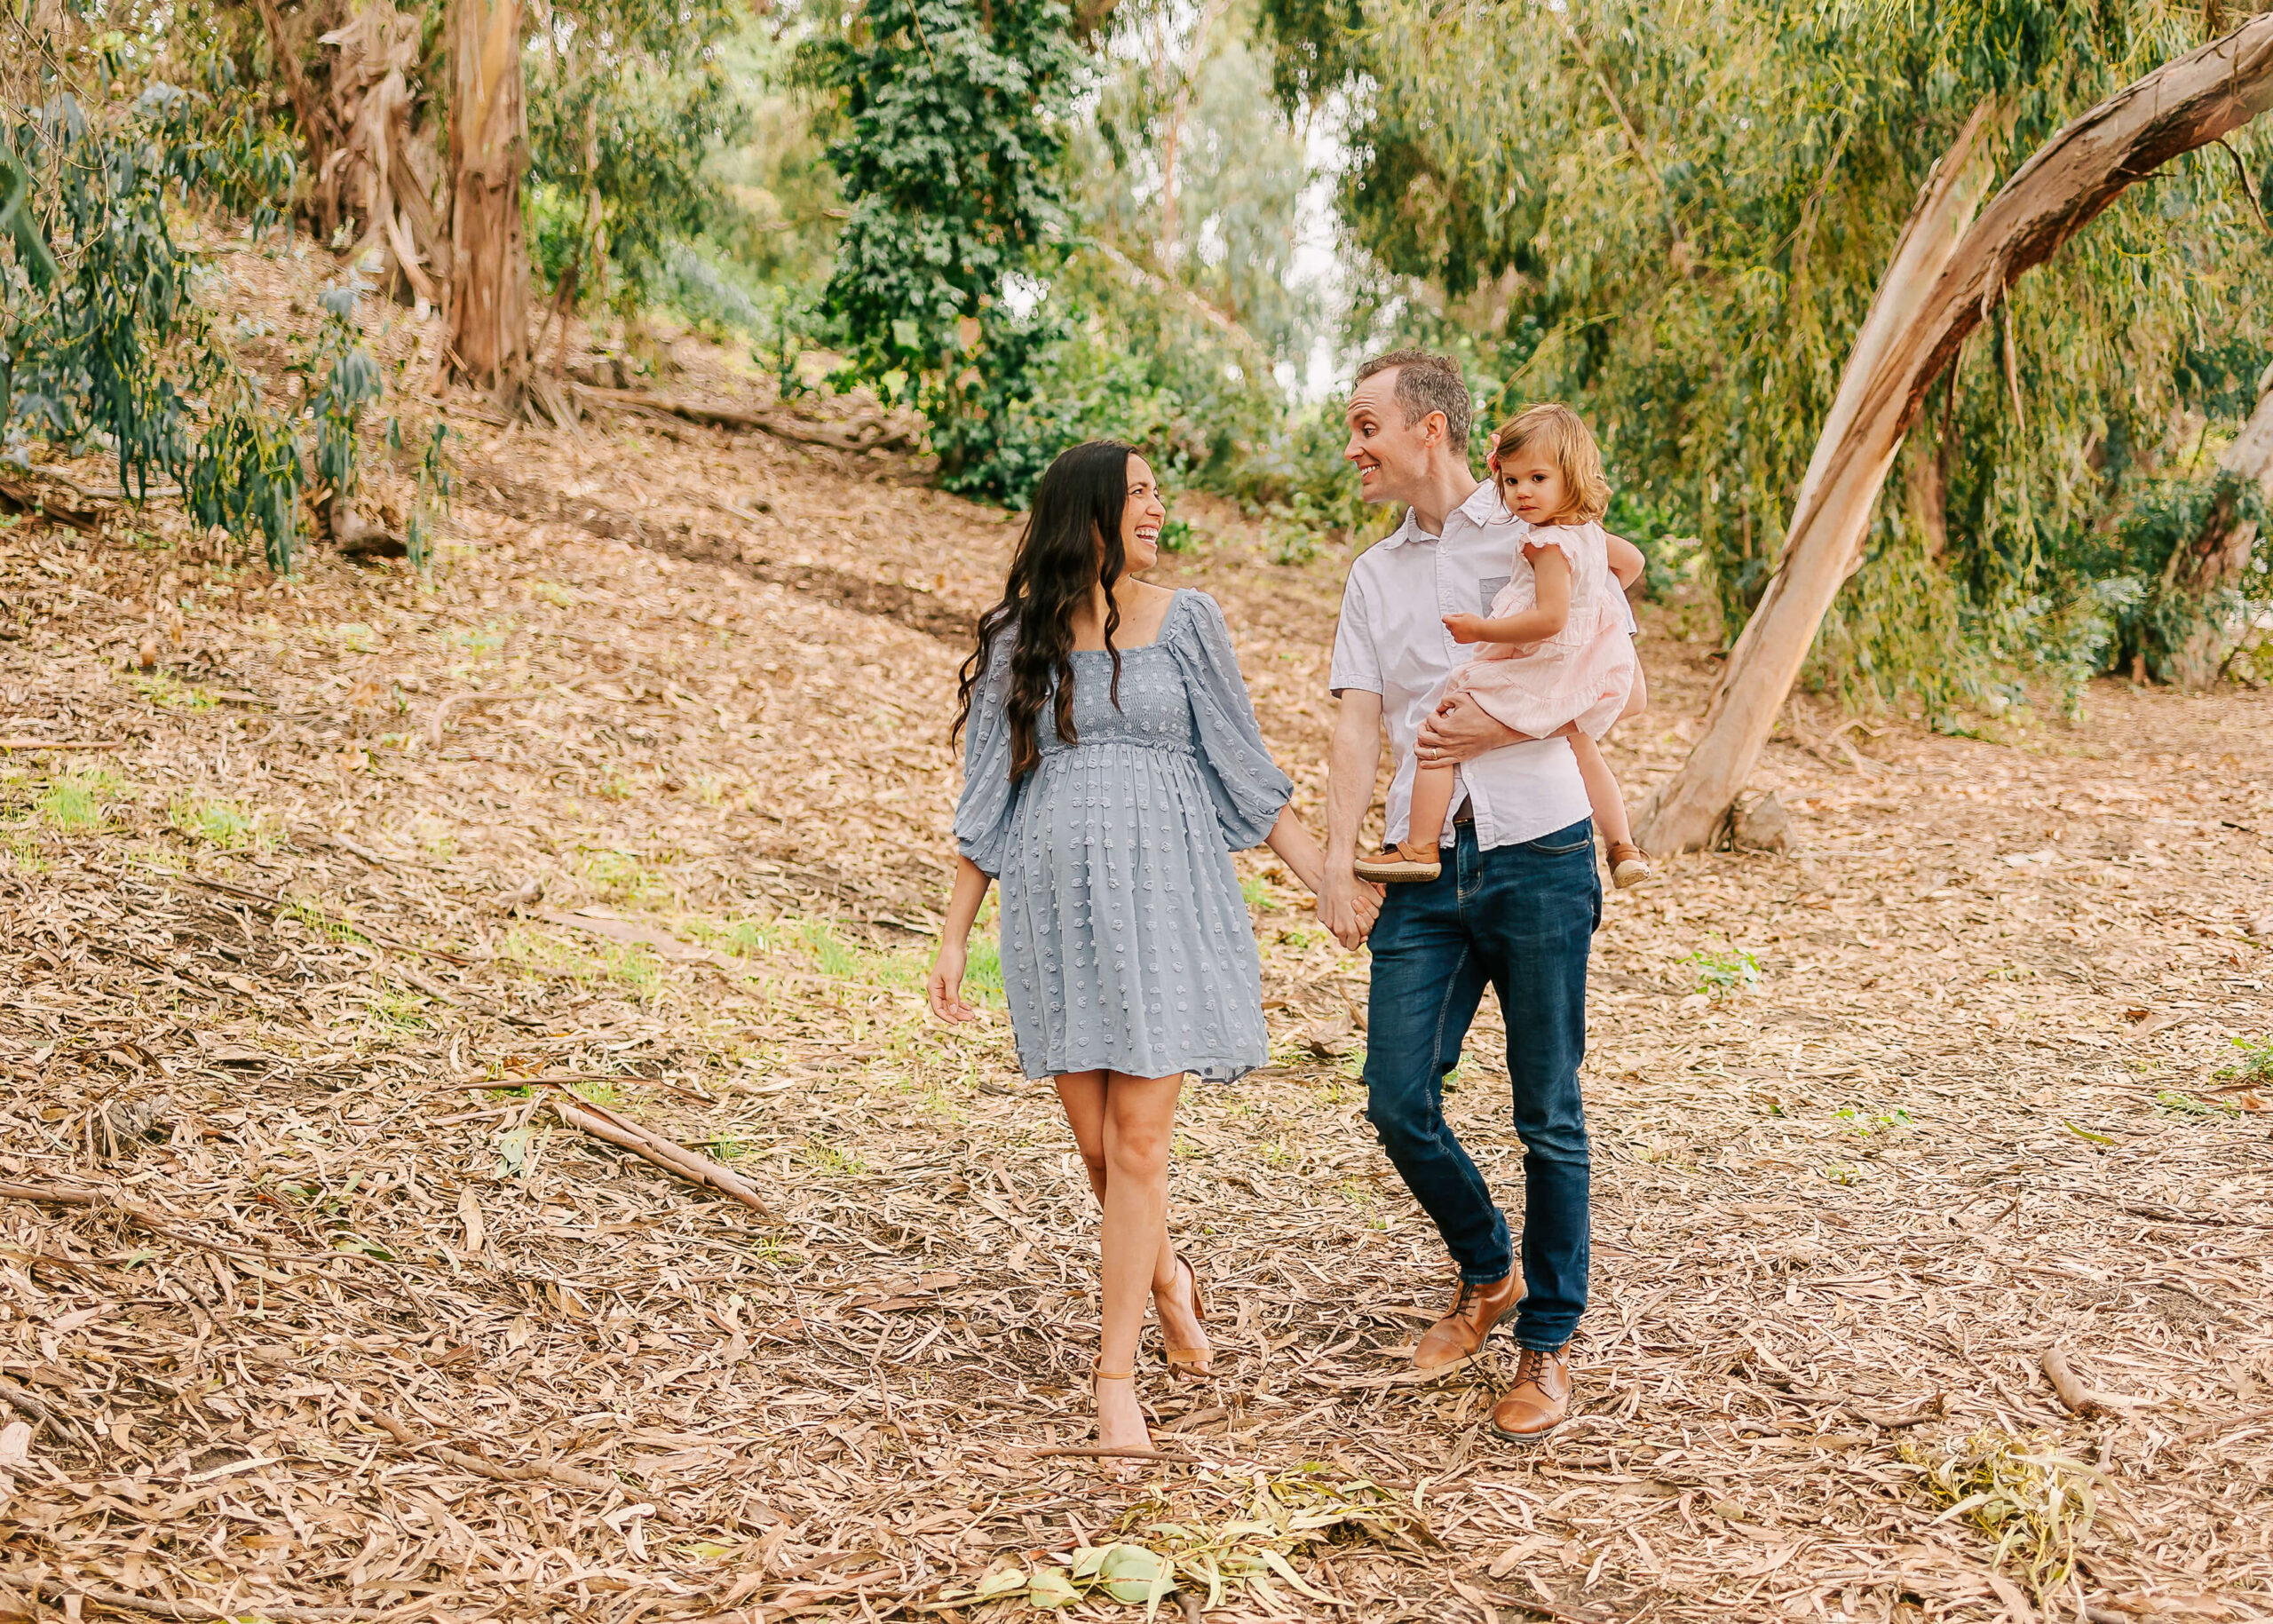 Family walking holding hands, dad is holding the big sister at nature maternity session in Los Angeles. By Ashley Nicole Photography.